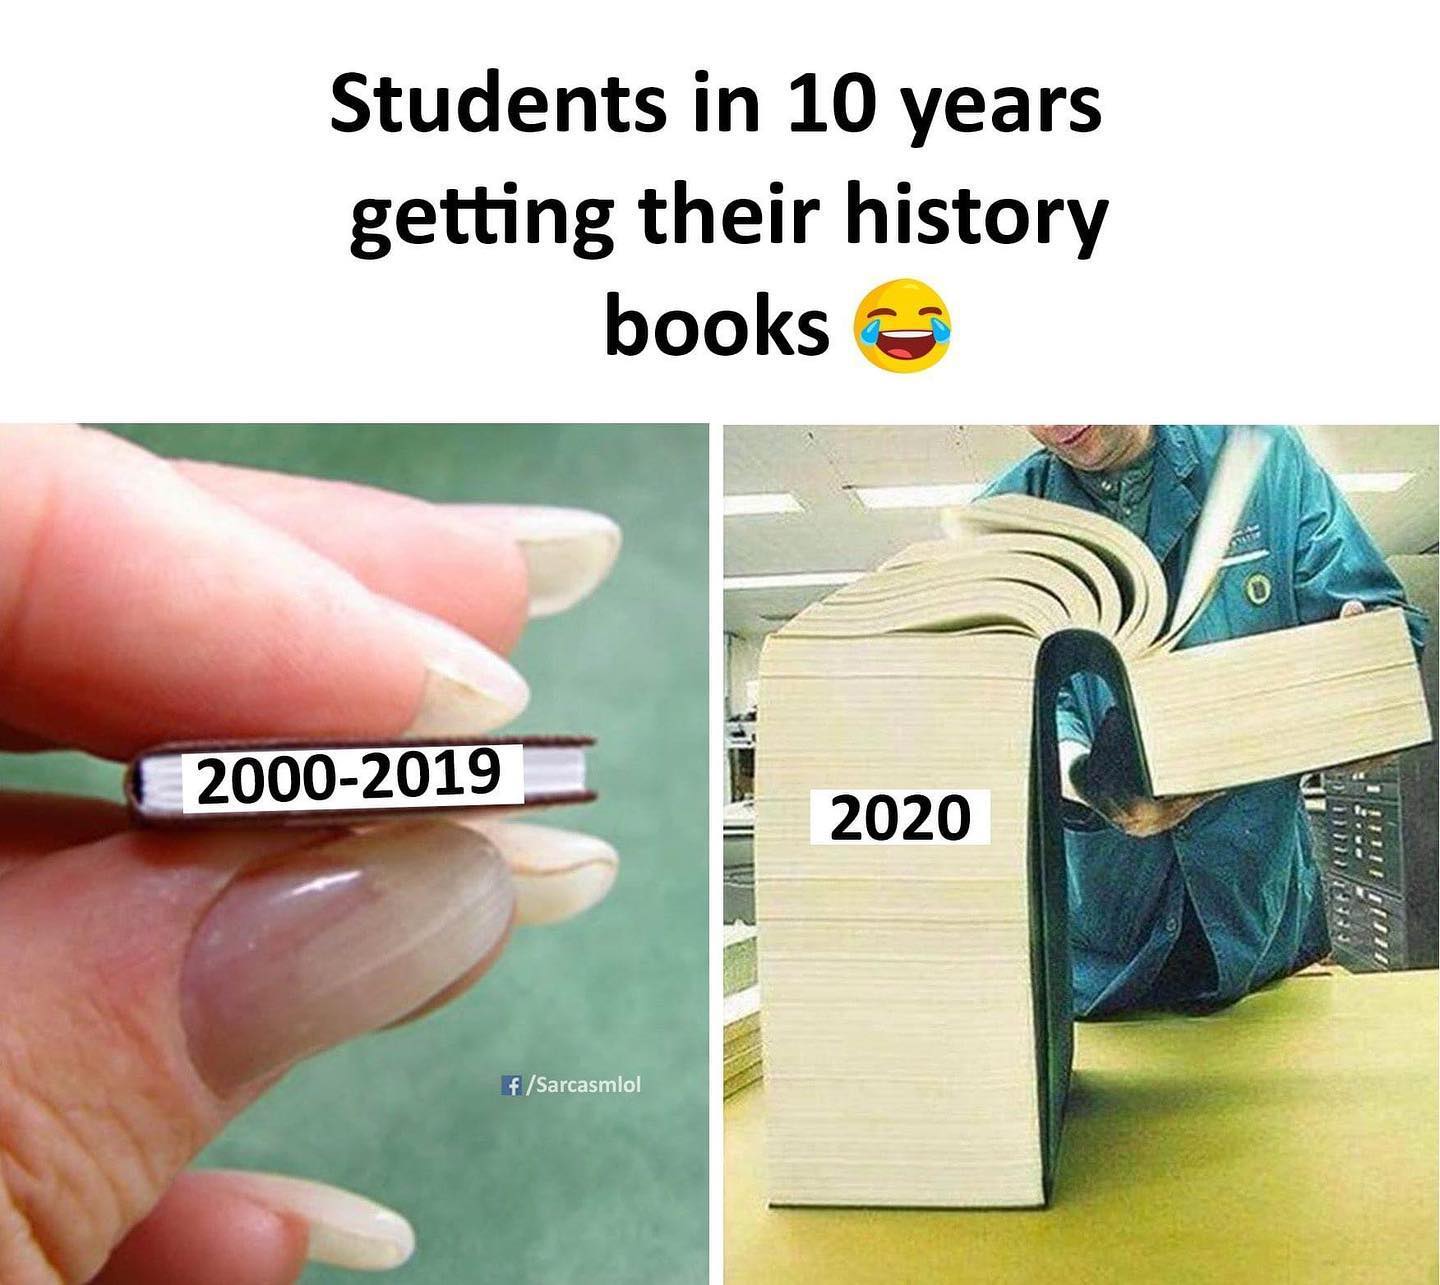 understand gemini - Students in 10 years getting their history books 20002019 2020 fSarcasmlol